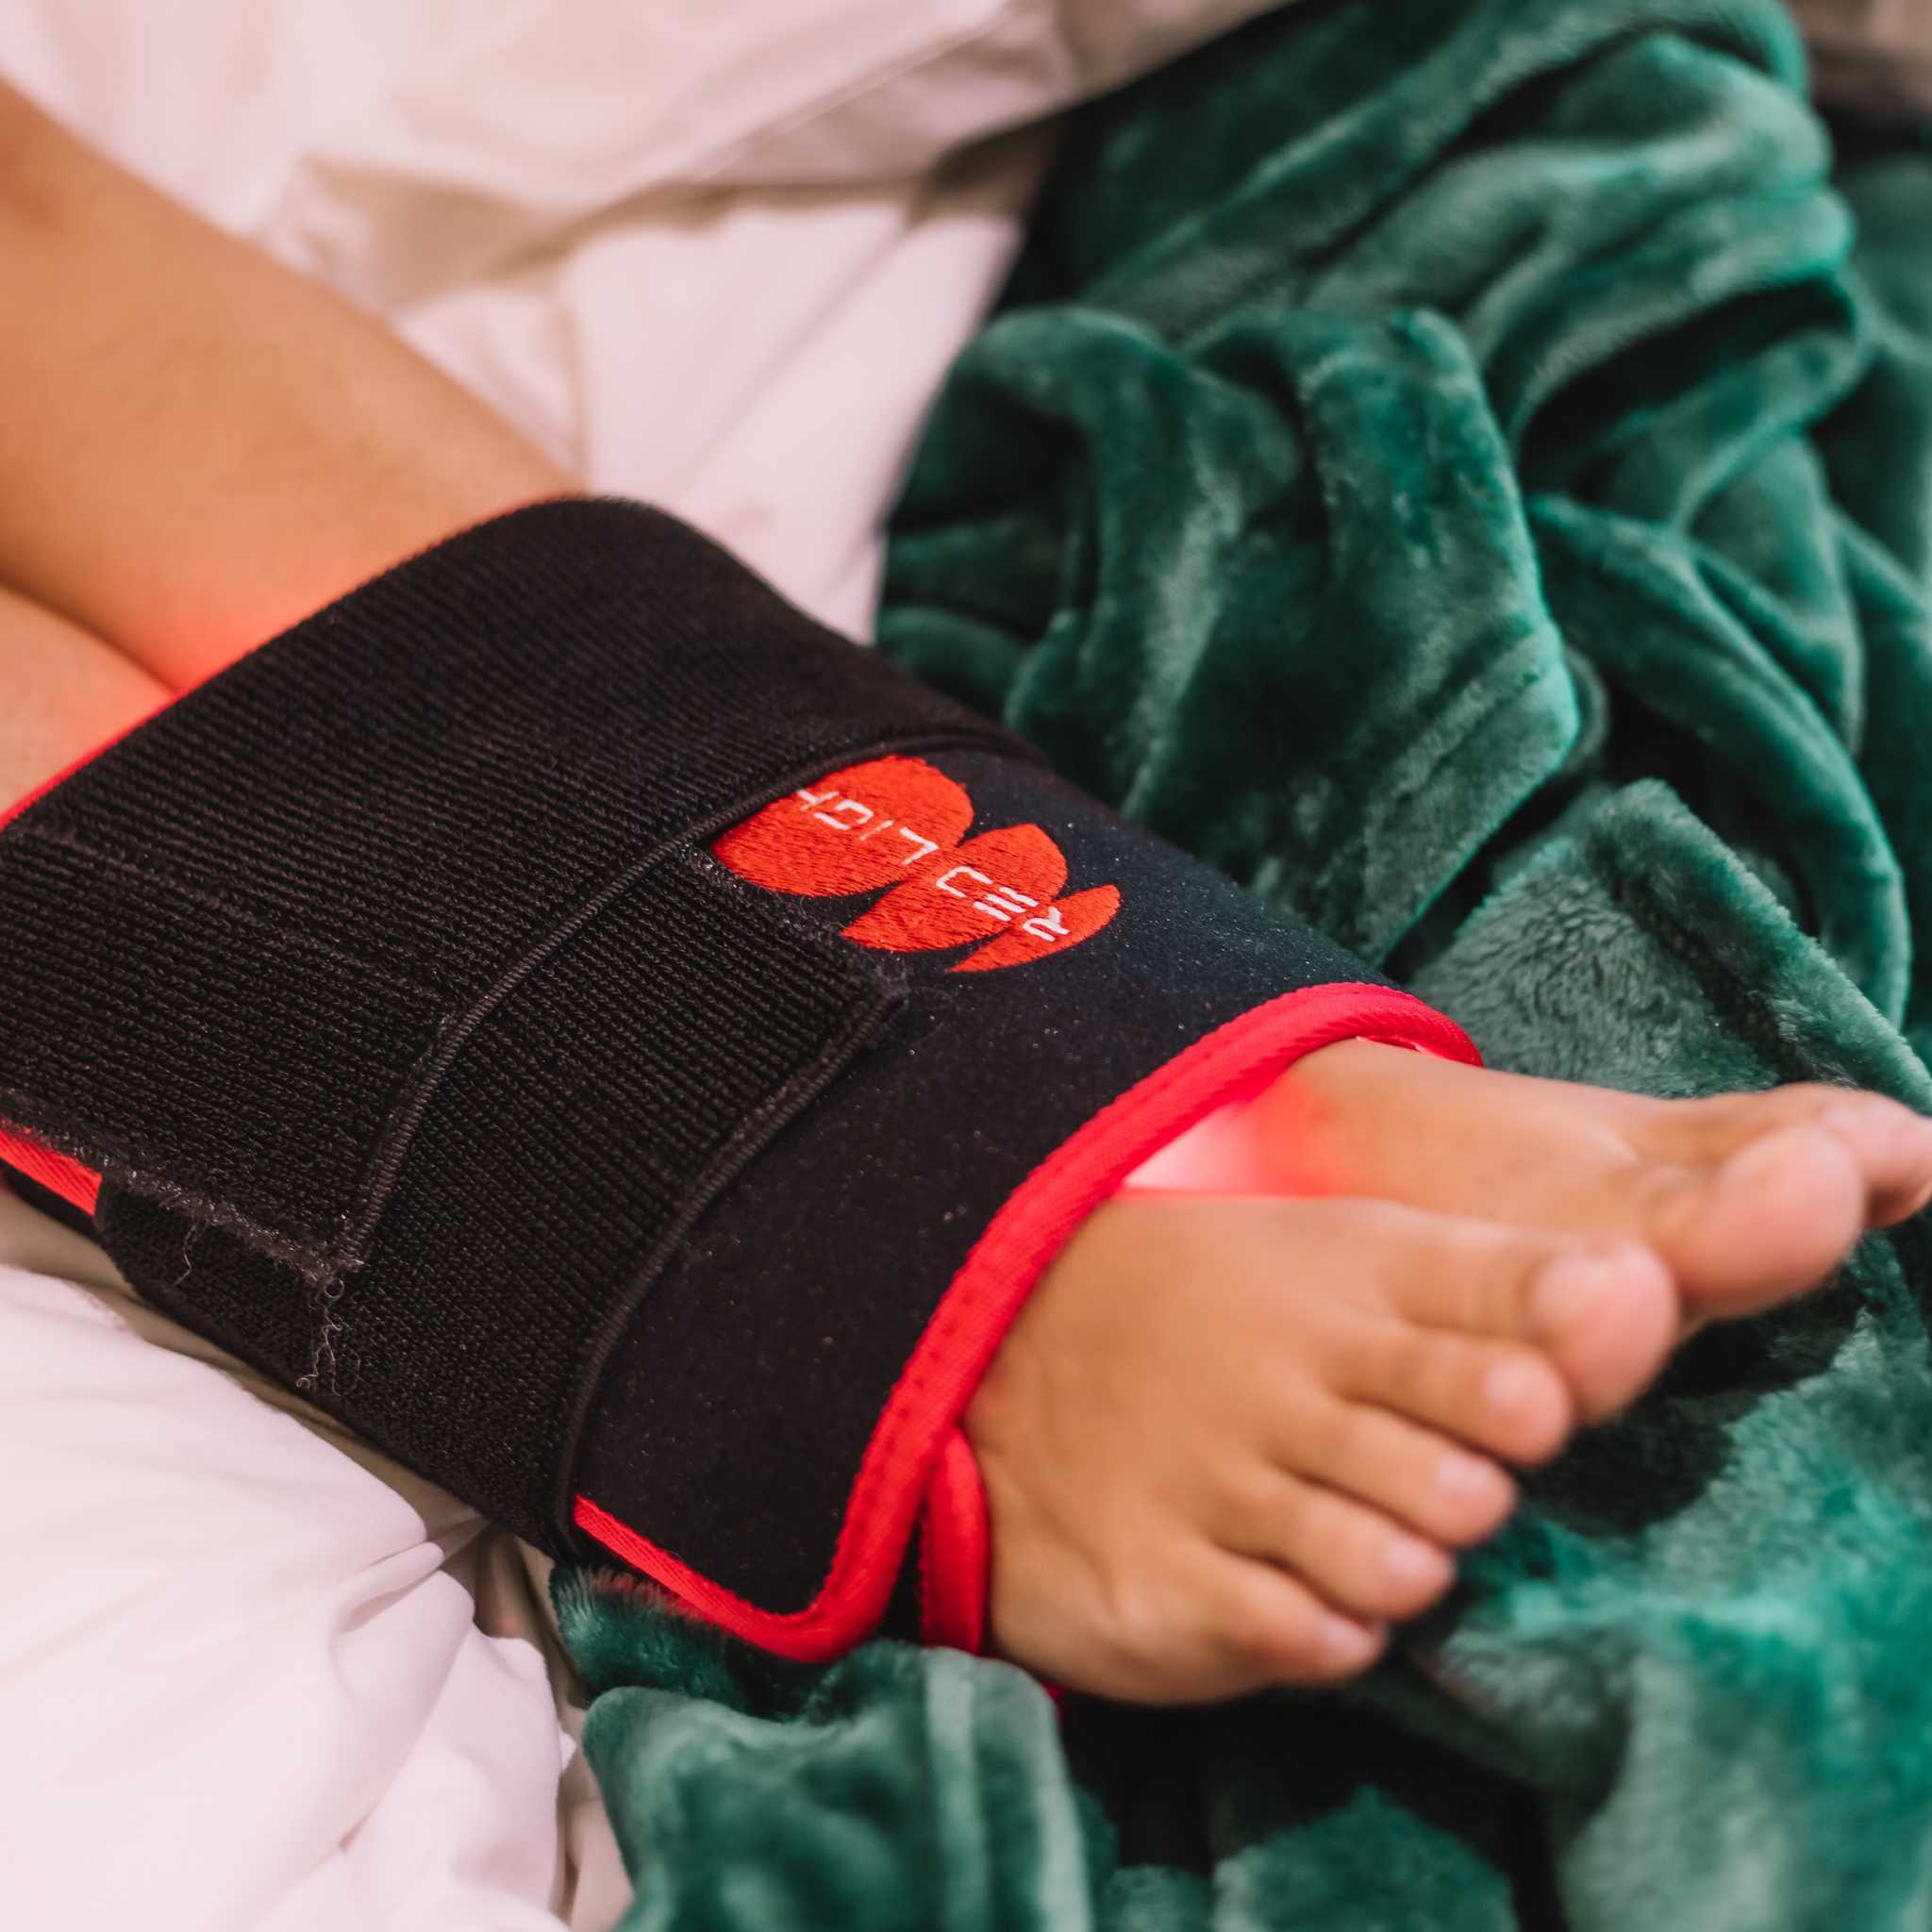 Easy to use PainGo Pad red light therapy for sore ankles